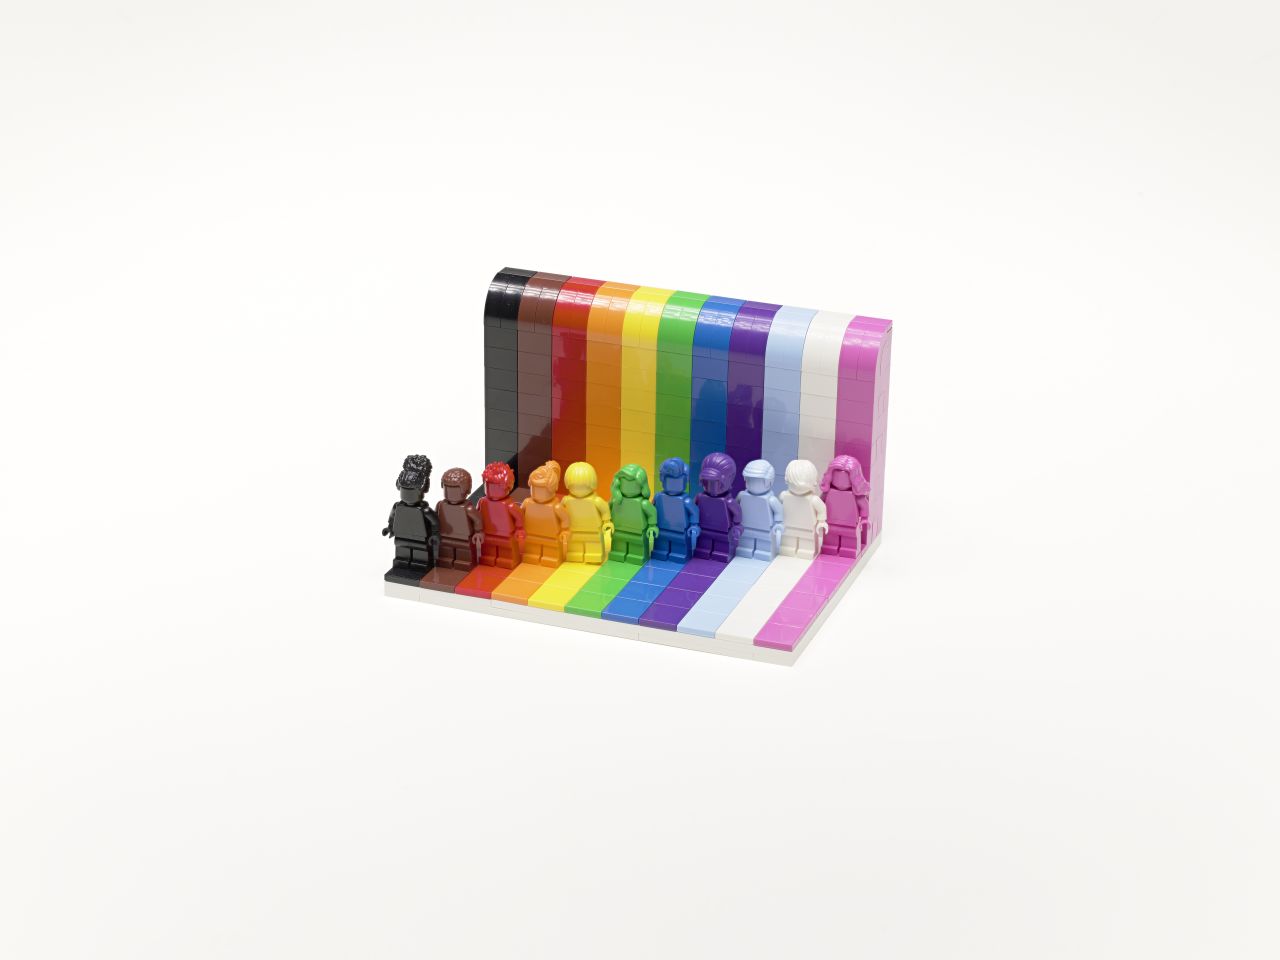 Different Lego play figures in bright colors representing diversity